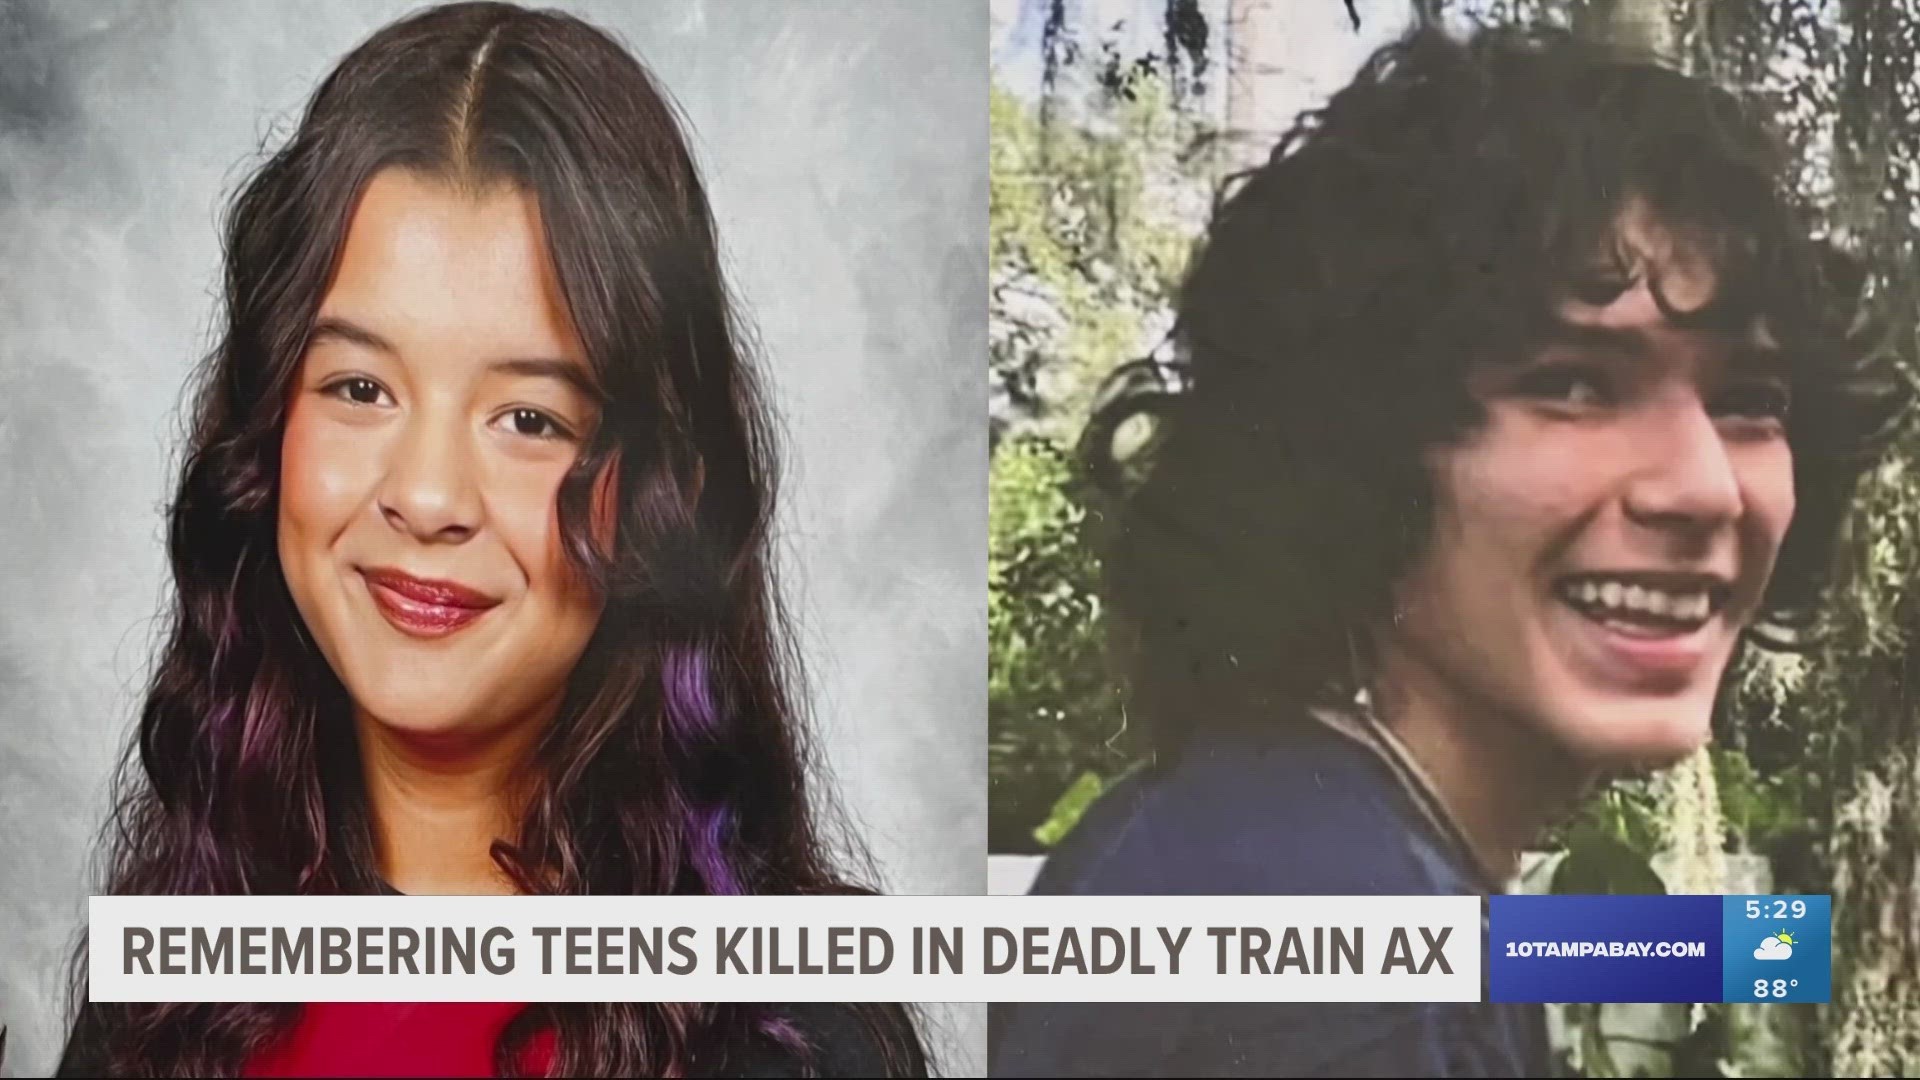 Alyssa Hernandez, 17, and Jakub Lopez, 17, both attended Plant City High School where students and staff mourn the loss of both teens after a tragic crash.